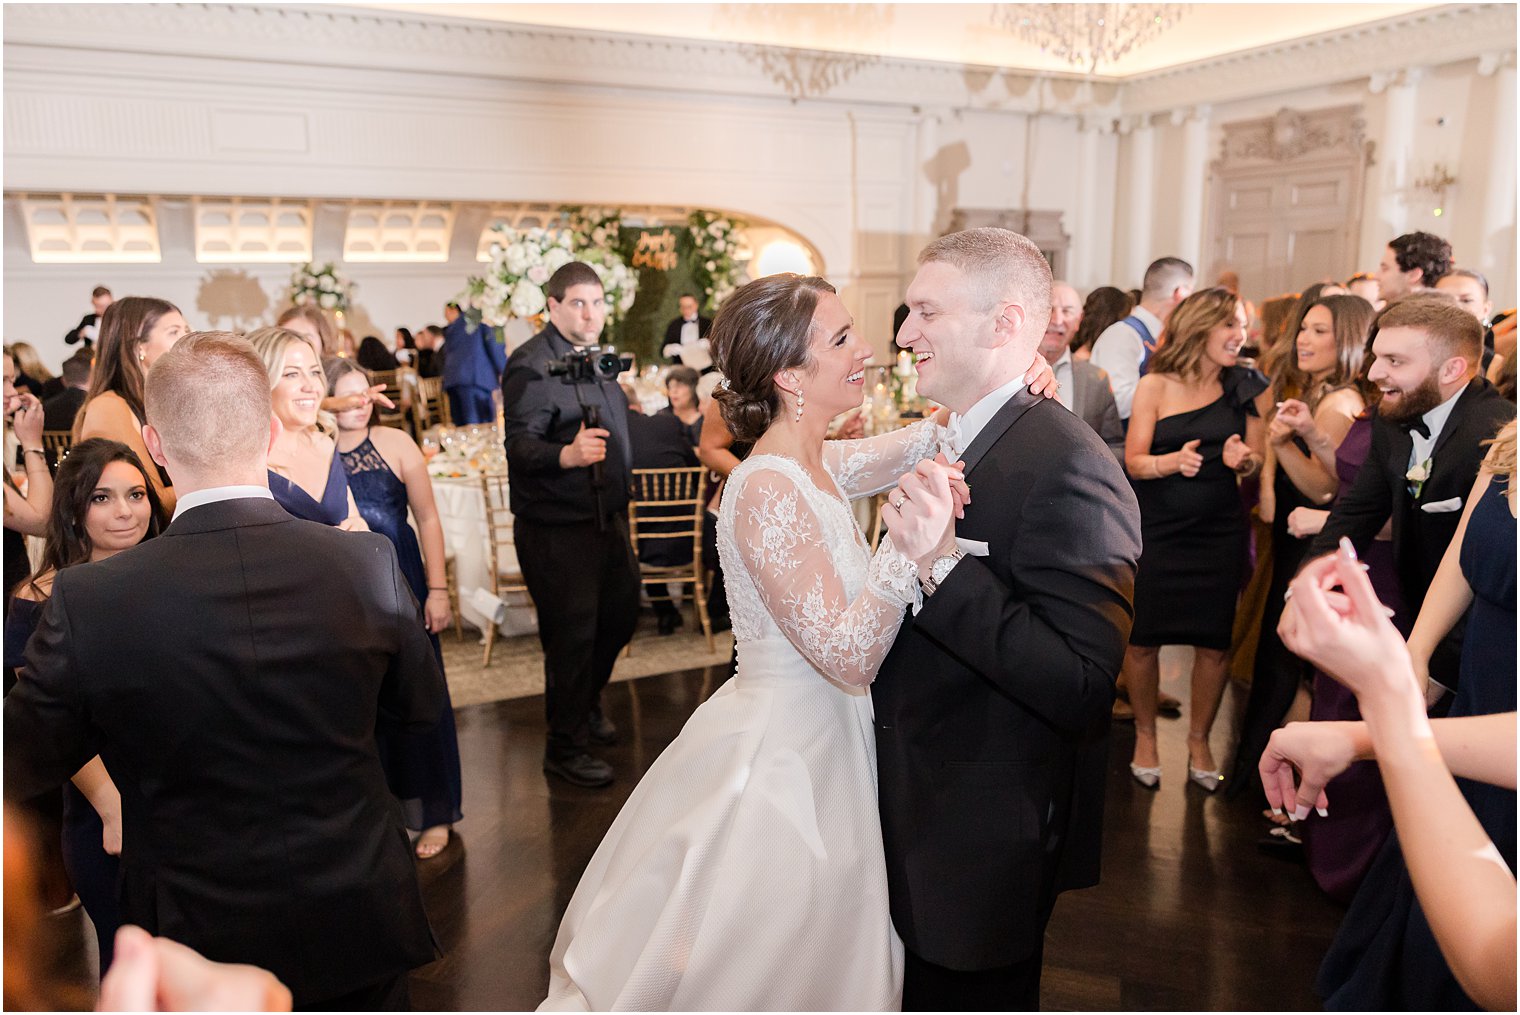 newlyweds sing and dance together during wedding reception 